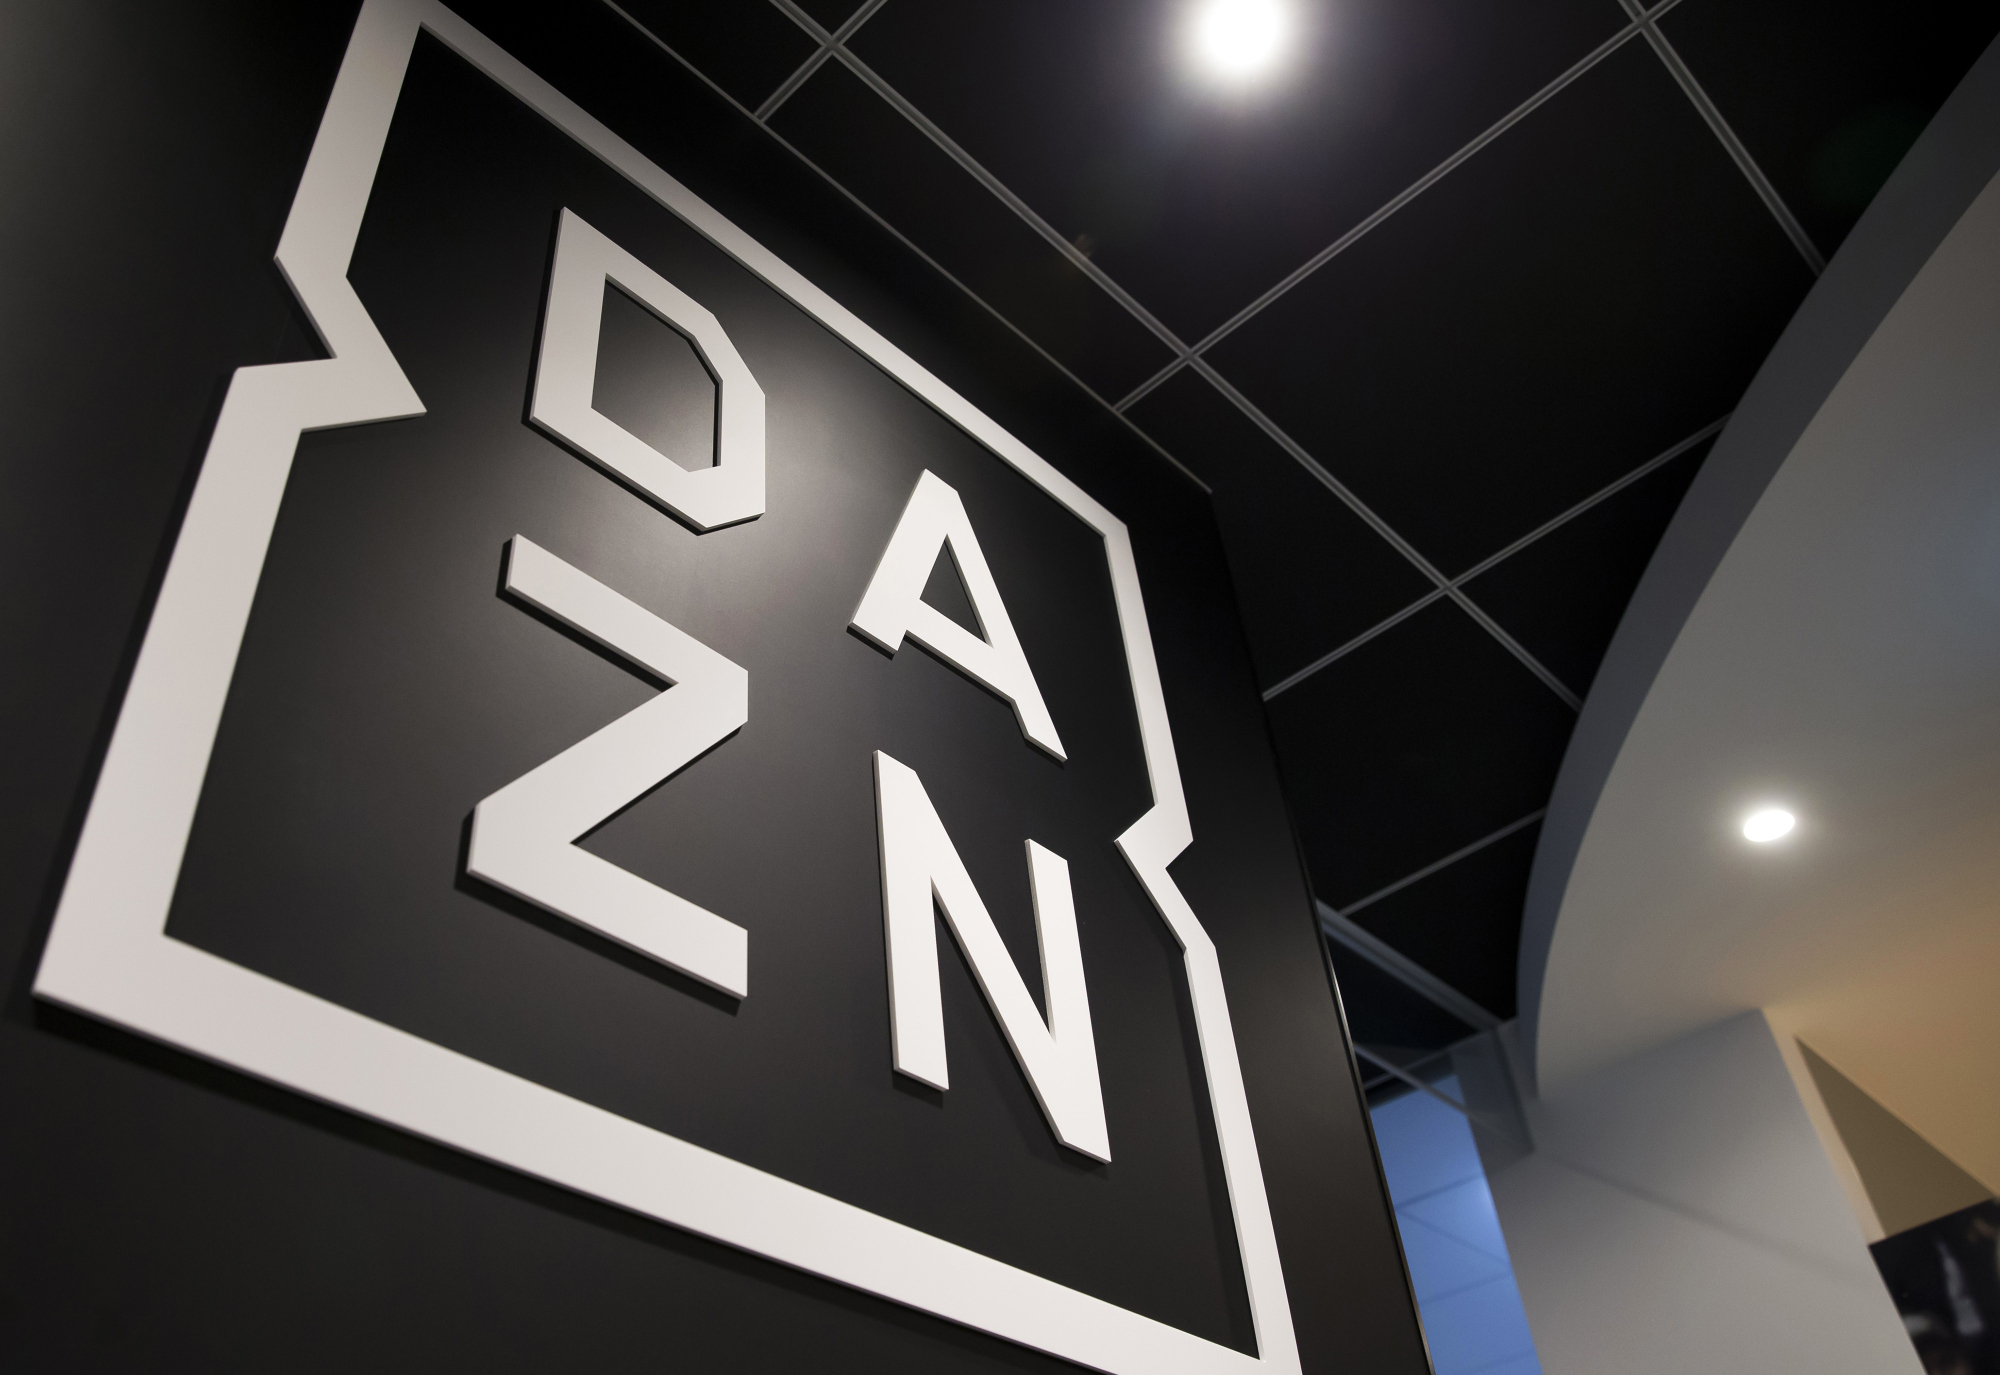 DAZN Chief Executive Officer James Rushton Interview